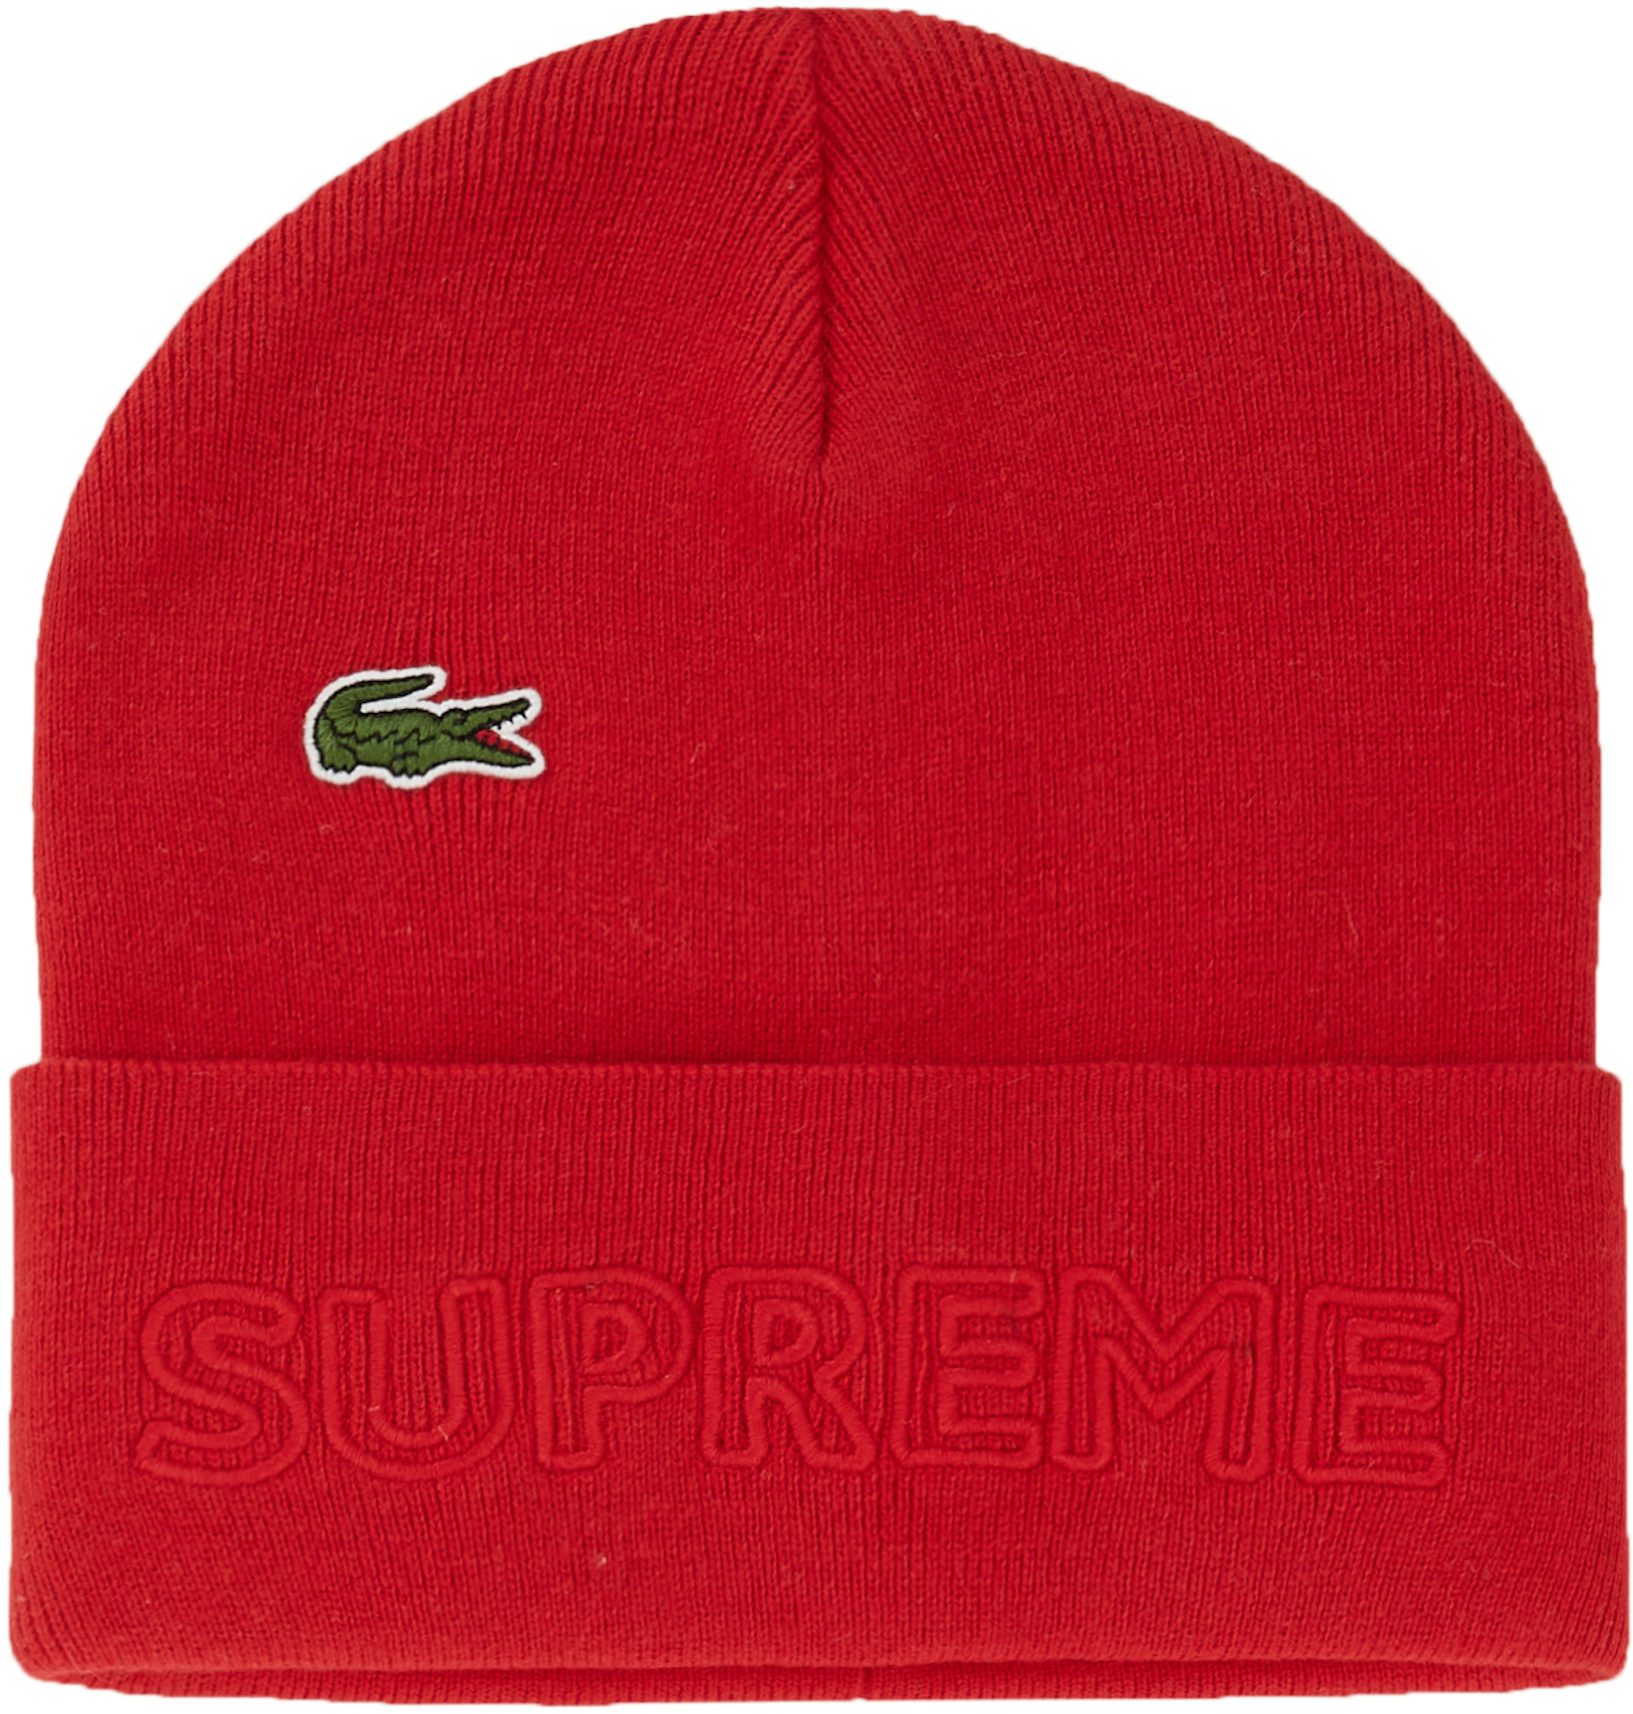 Supreme LACOSTE Beanie Red FW19 US - 